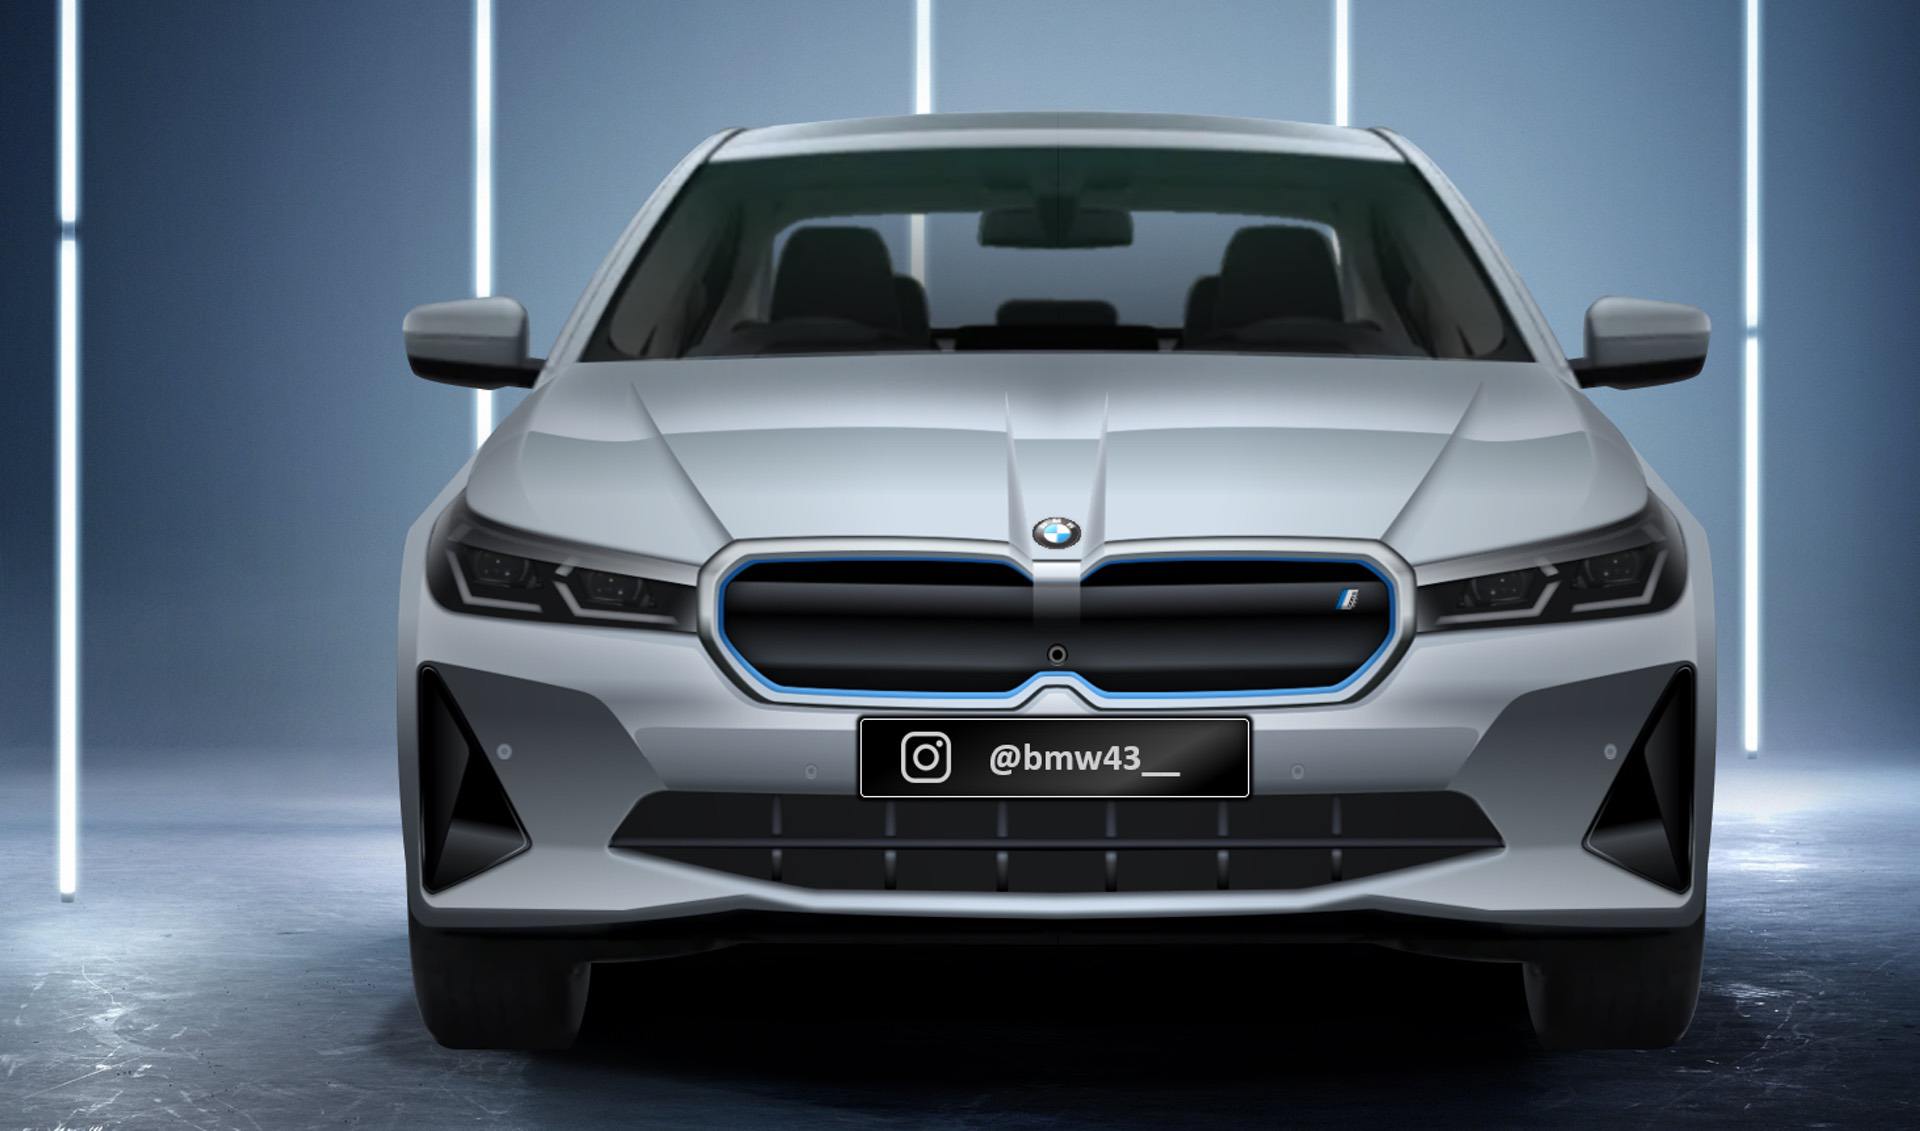 2023 BMW i5 Electric Sedan shows its face in a new rendering